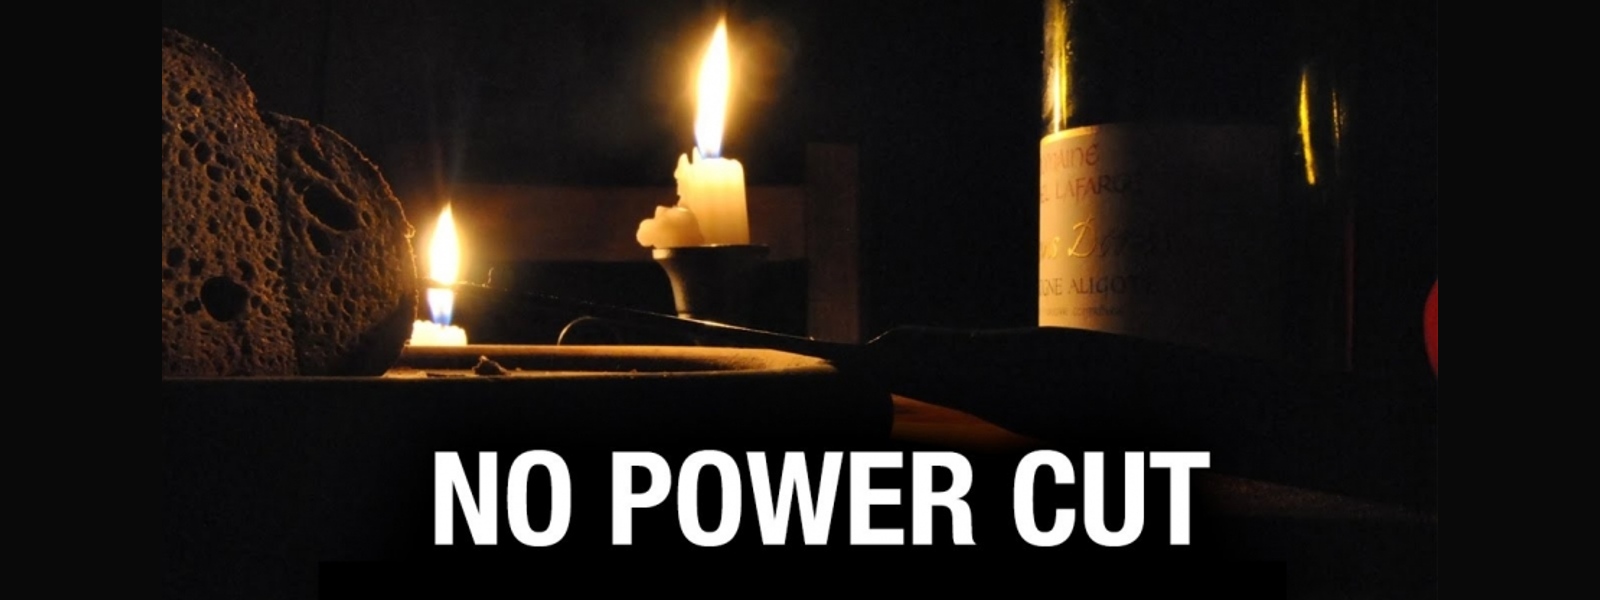 NO power outages after 6:30 PM